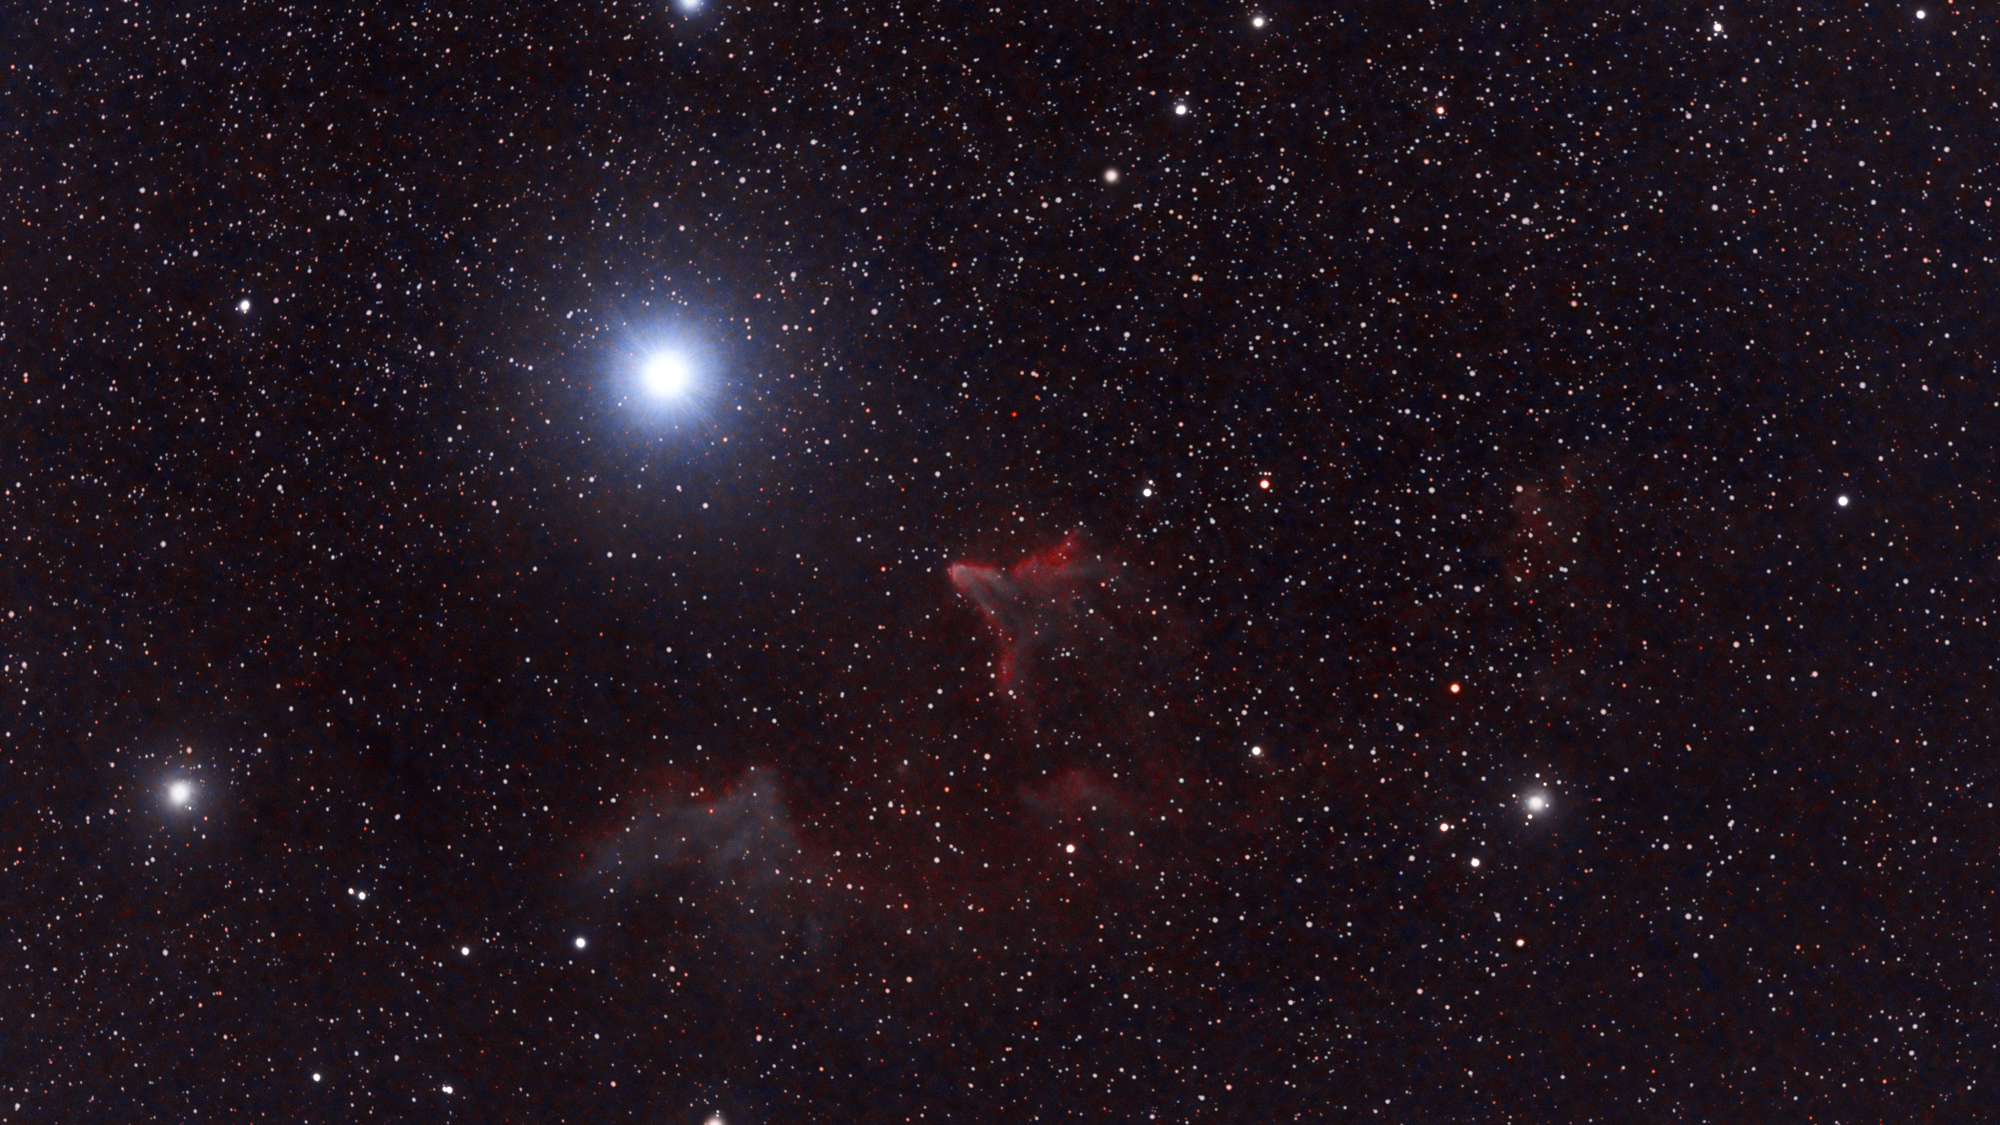 IC63_Nebuleuse_fantome_67x180s_32bits_stacked_processed-TIF_V3.png